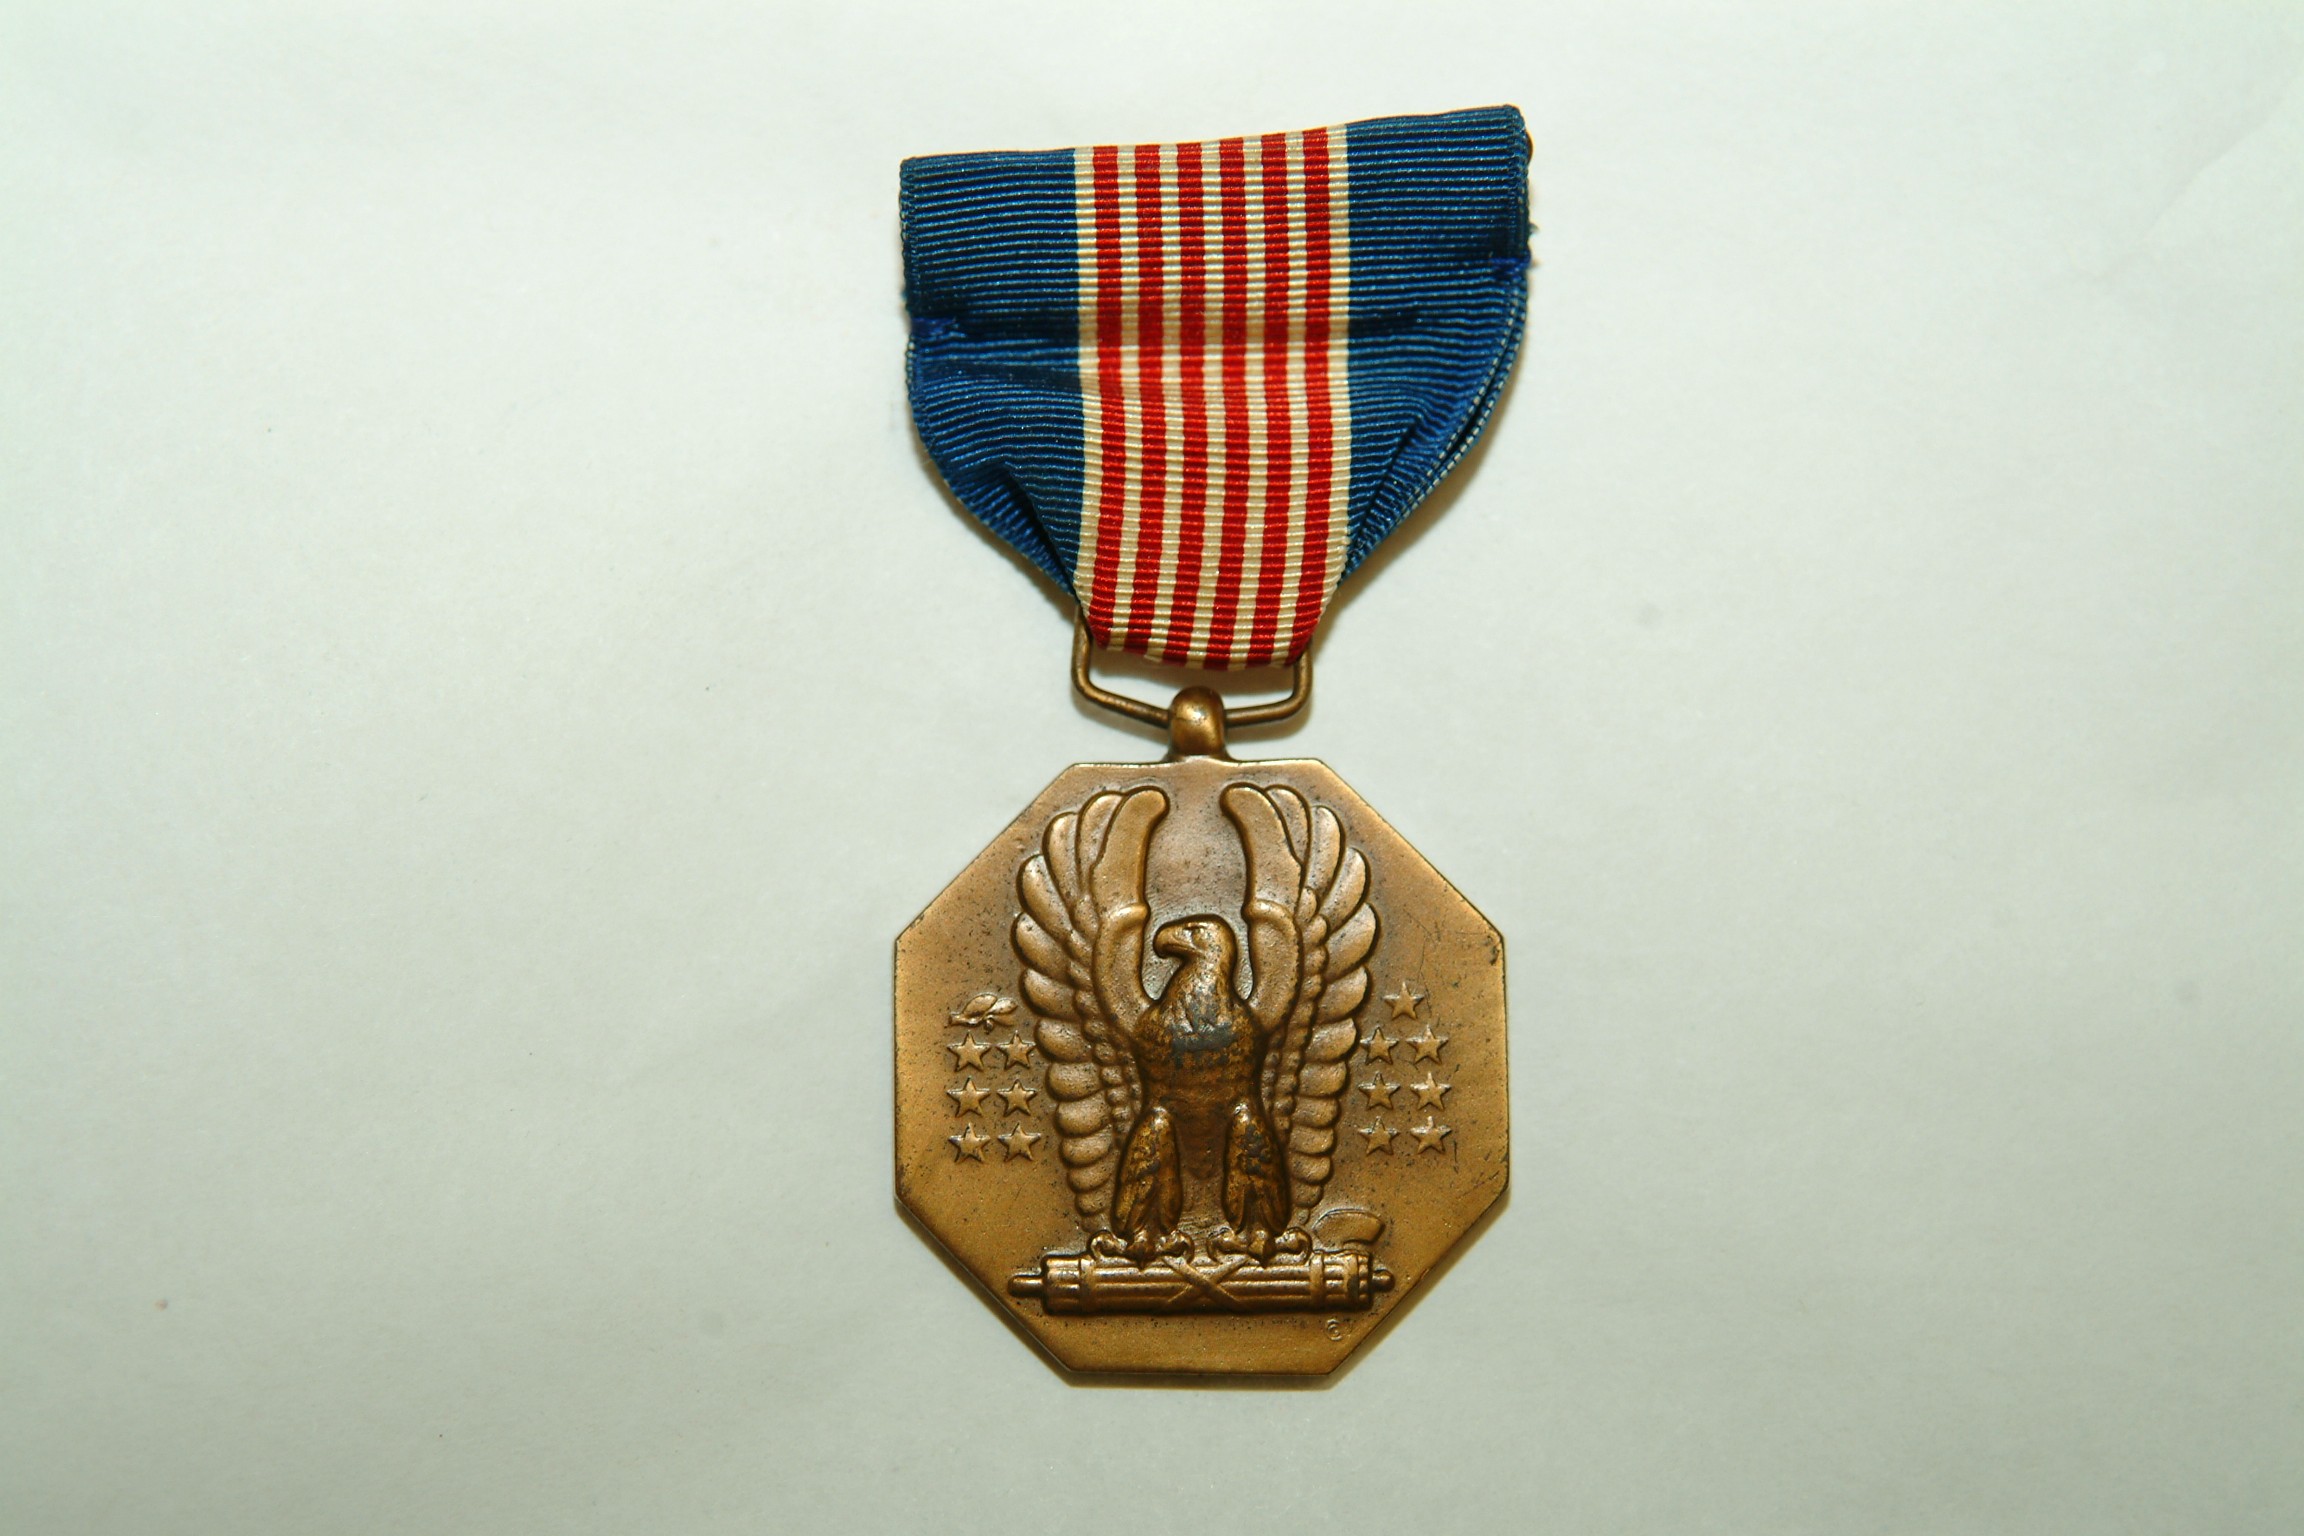 Ribbon for the Soldier's Medal U.S.A. 